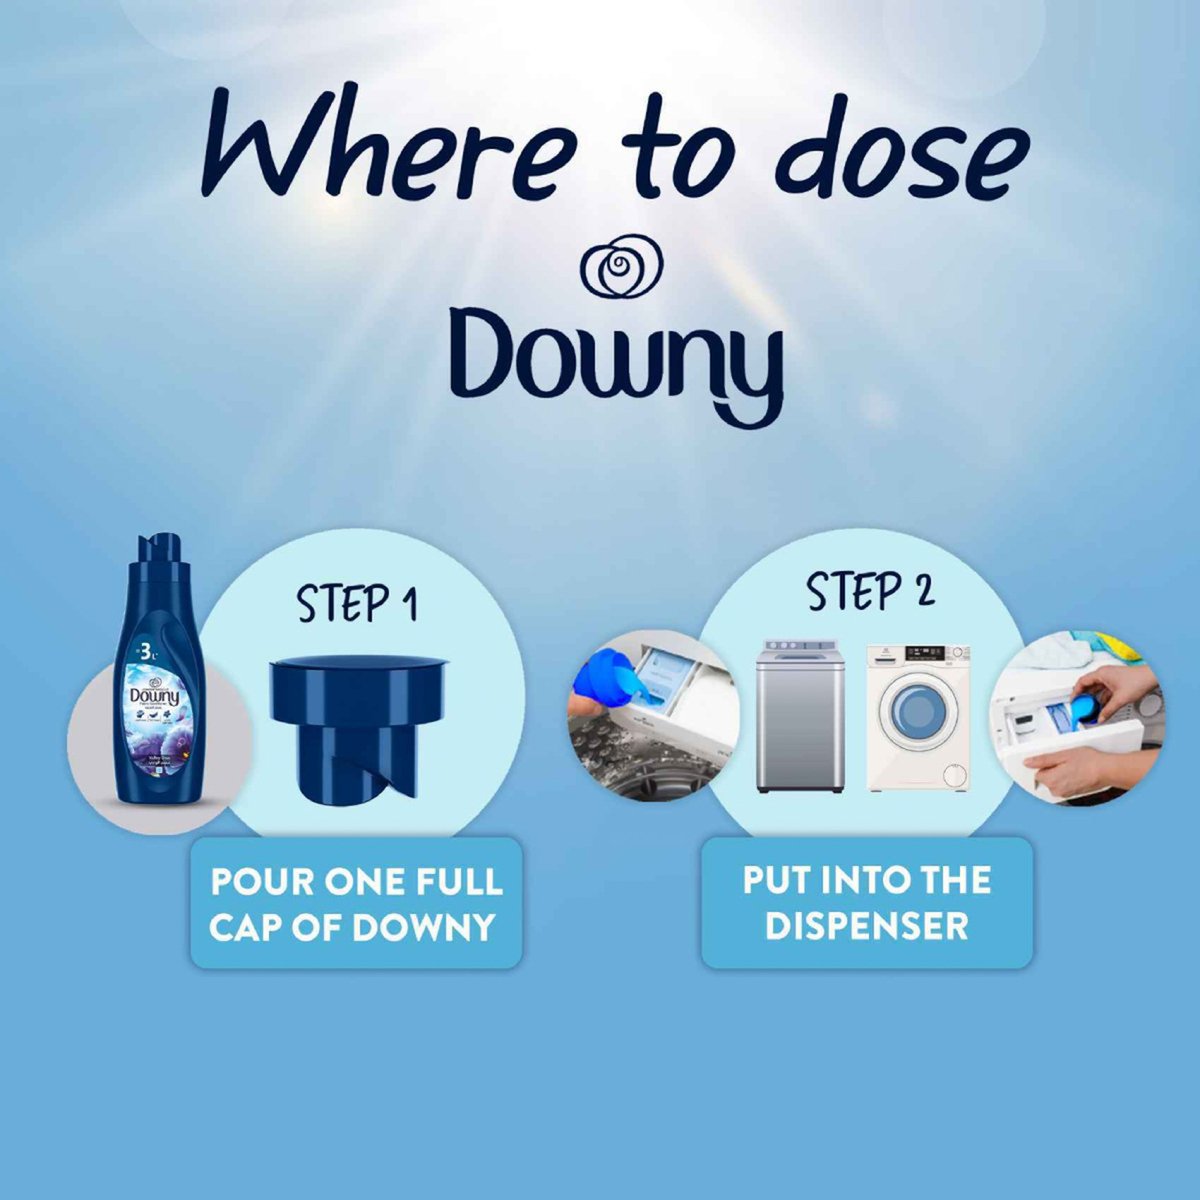 Downy Lavender & Musk Concentrate Fabric Conditioner Value Pack 2 Litres